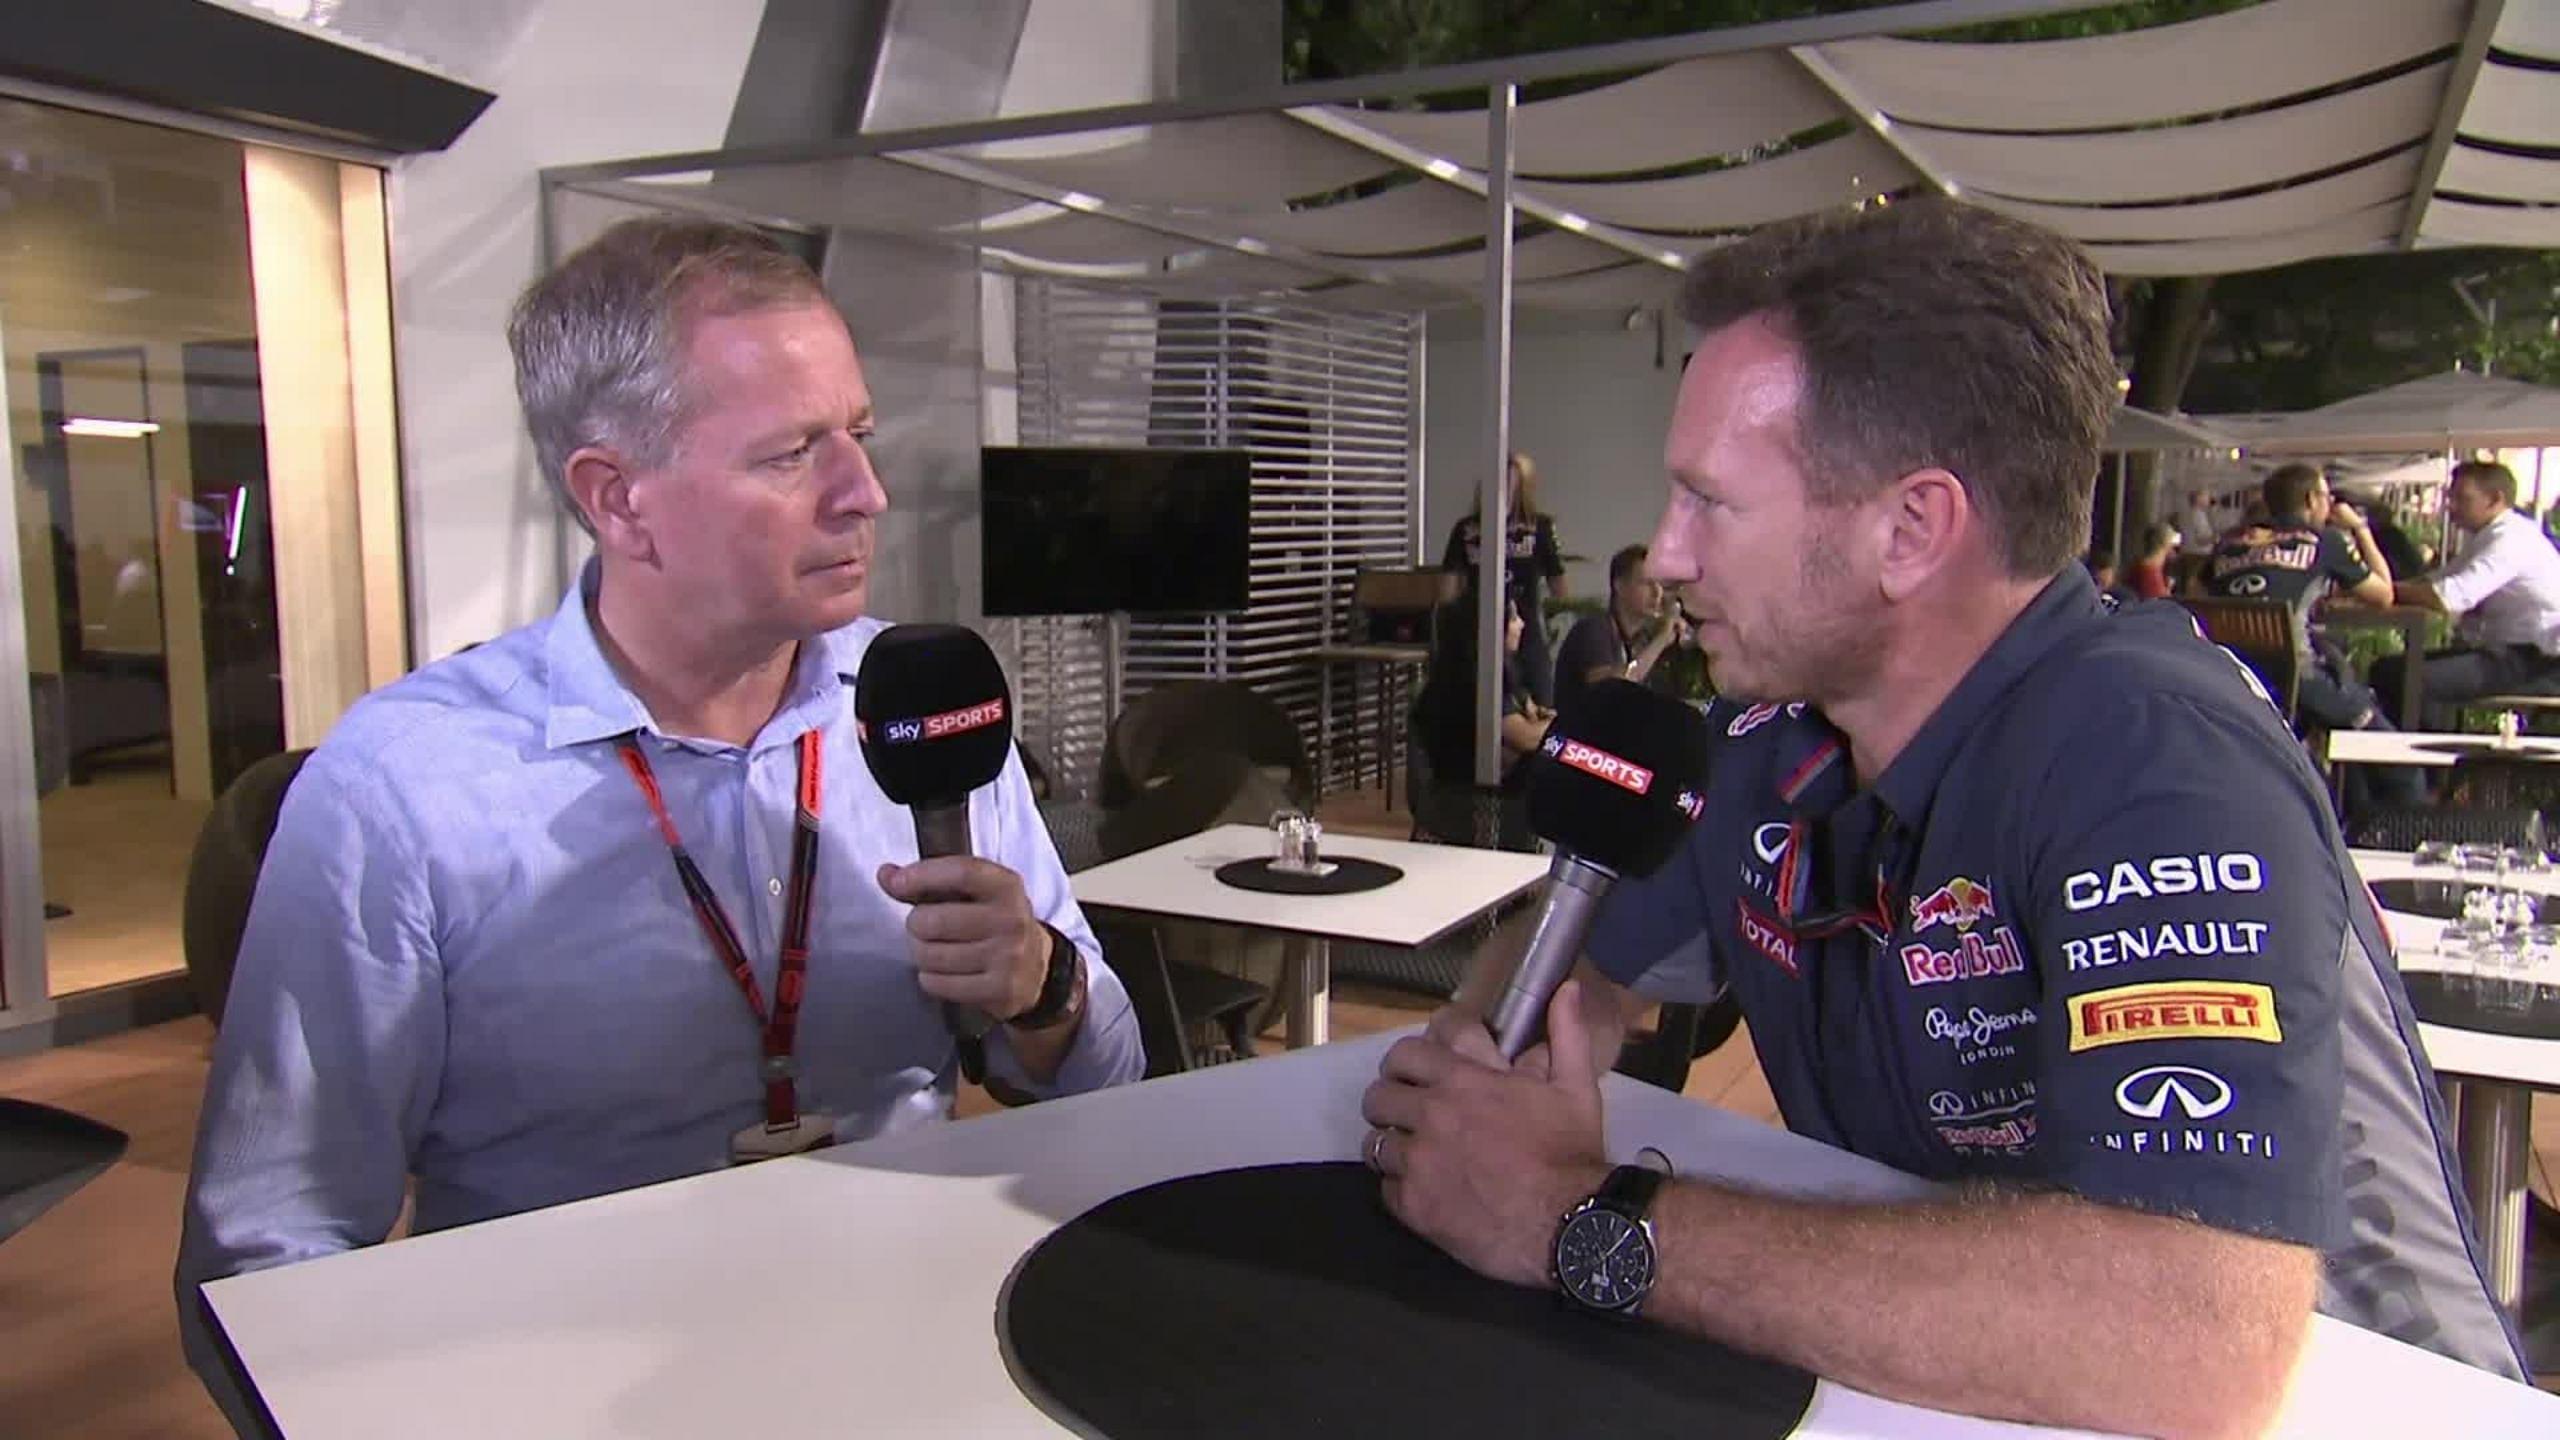 Christian Horner shares hilarious anecdote of a bet with Martin Brundle which left him naked on a pool